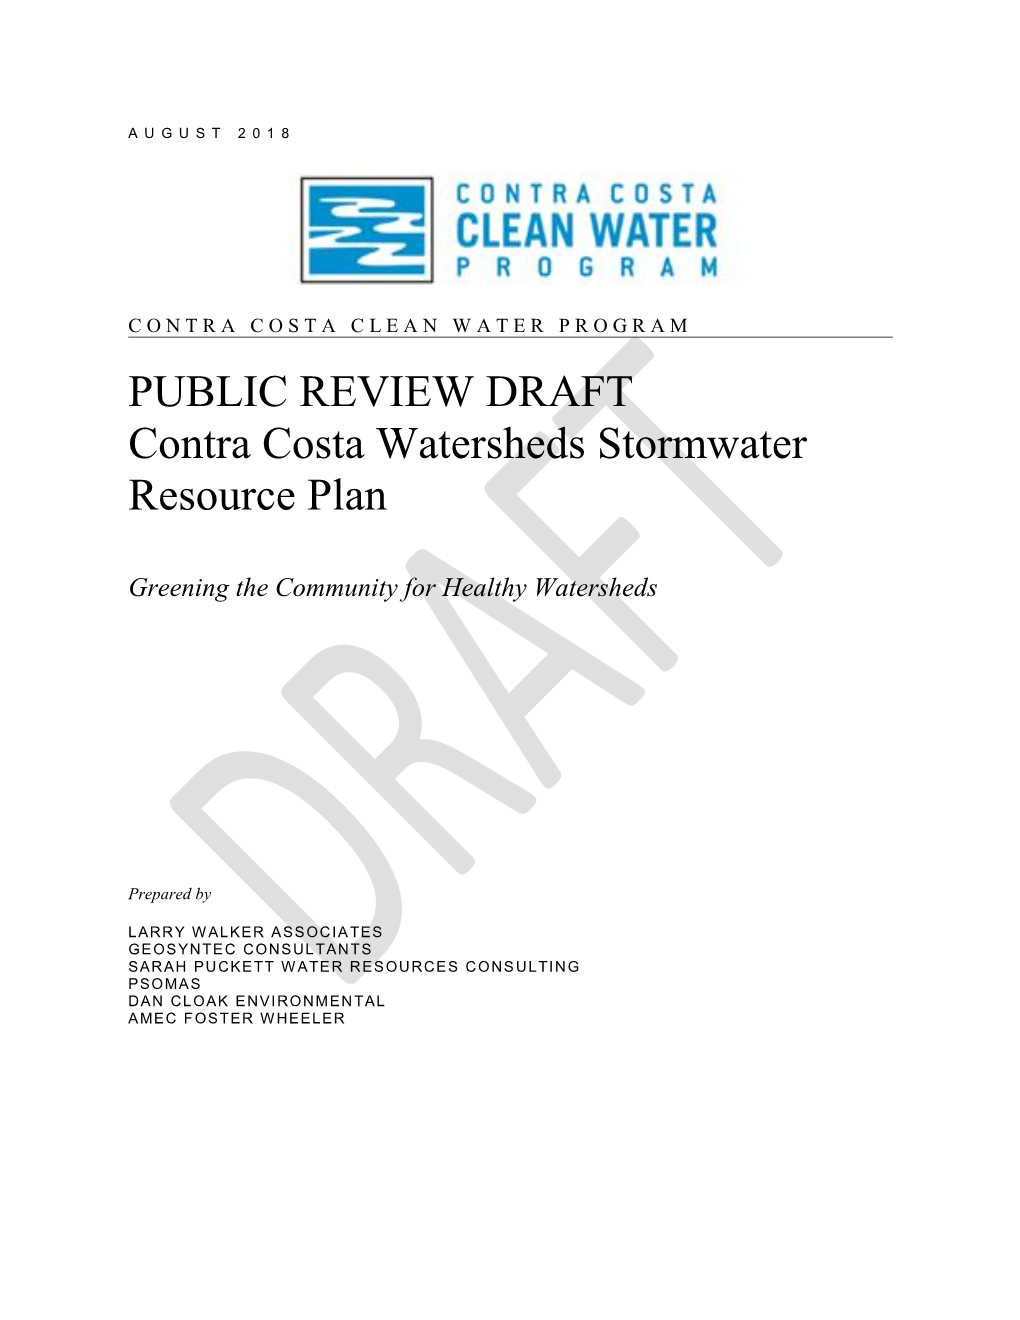 PUBLIC REVIEW DRAFT Contra Costa Watersheds Stormwater Resource Plan